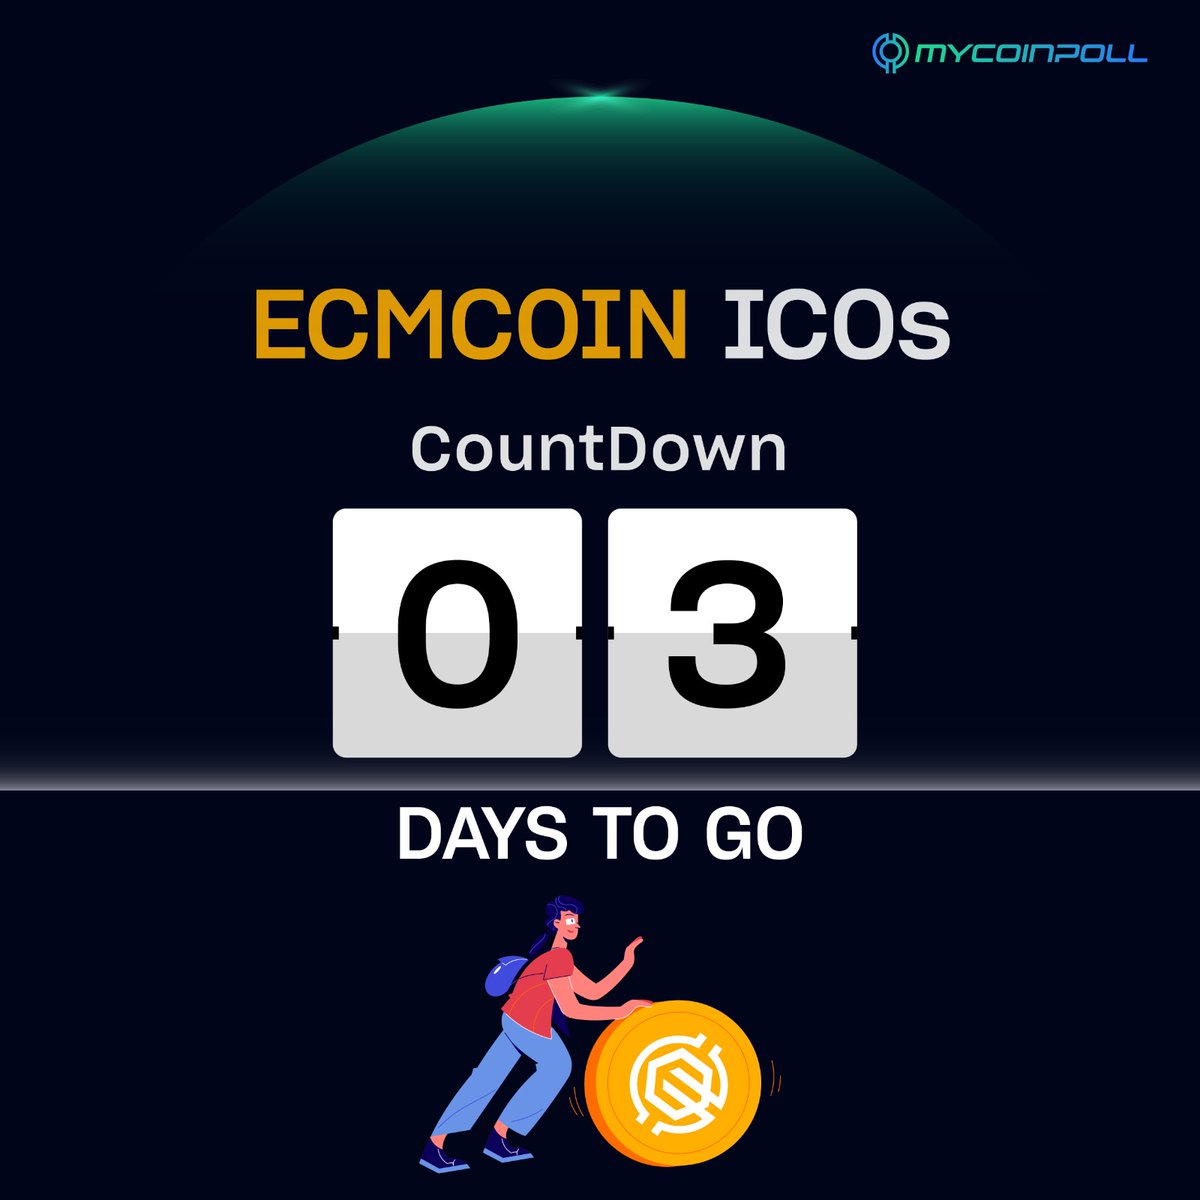 Dear valued members,

We would like to inform you that the public presale of the 💰 ECM Coin Initial Coin Offering (ICO) will commence in 🔜 3 days. We encourage you to take advantage of this opportunity to purchase ECM Coin at a discounted price by visiting our website. This…